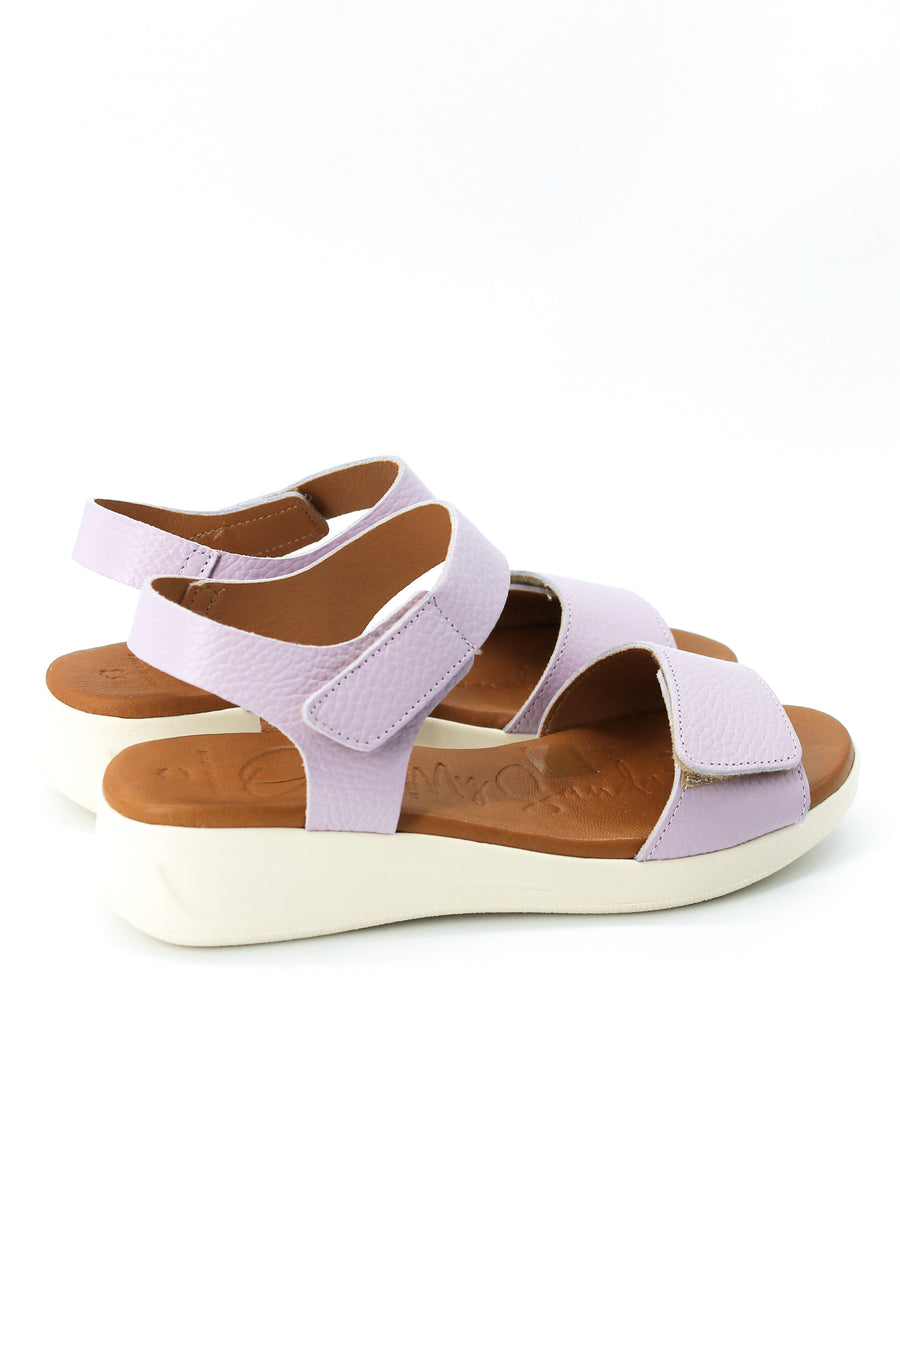 Oh My Sandals 5183 Lilac